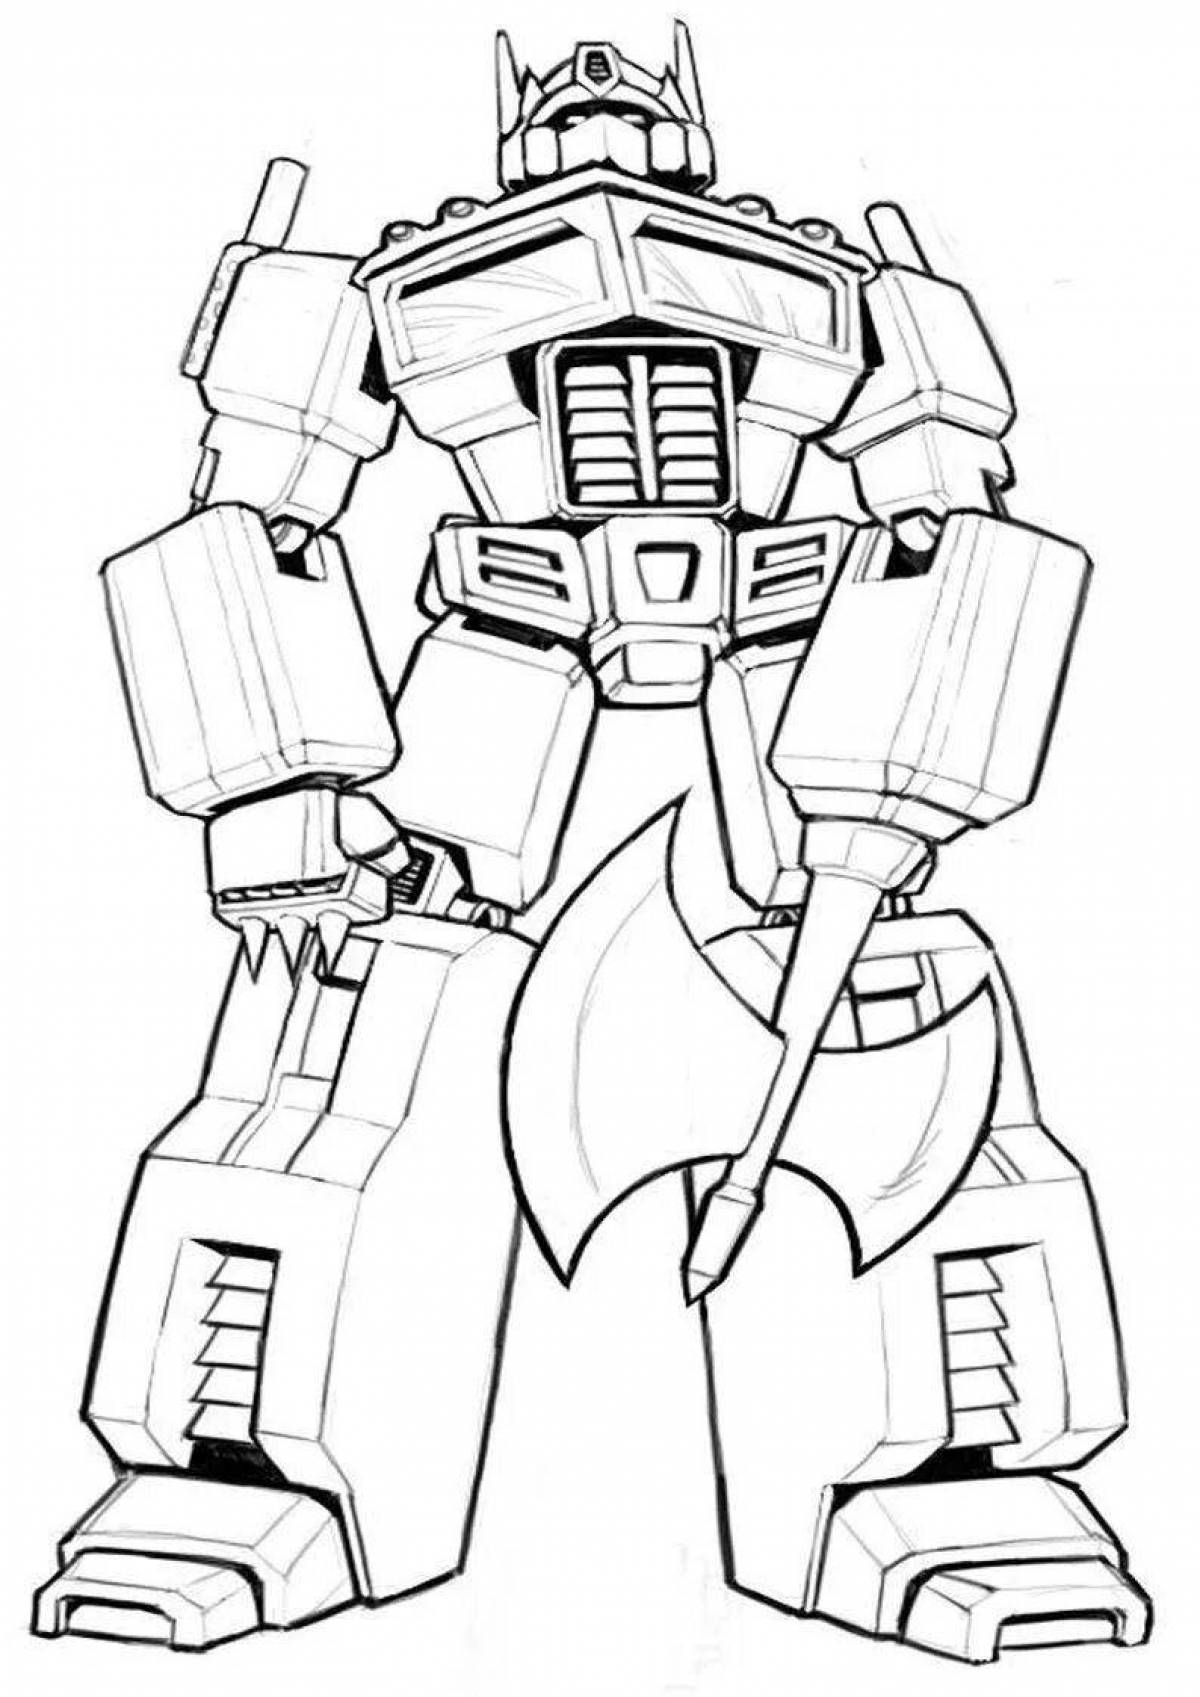 Optimus robot colorful expressive coloring page